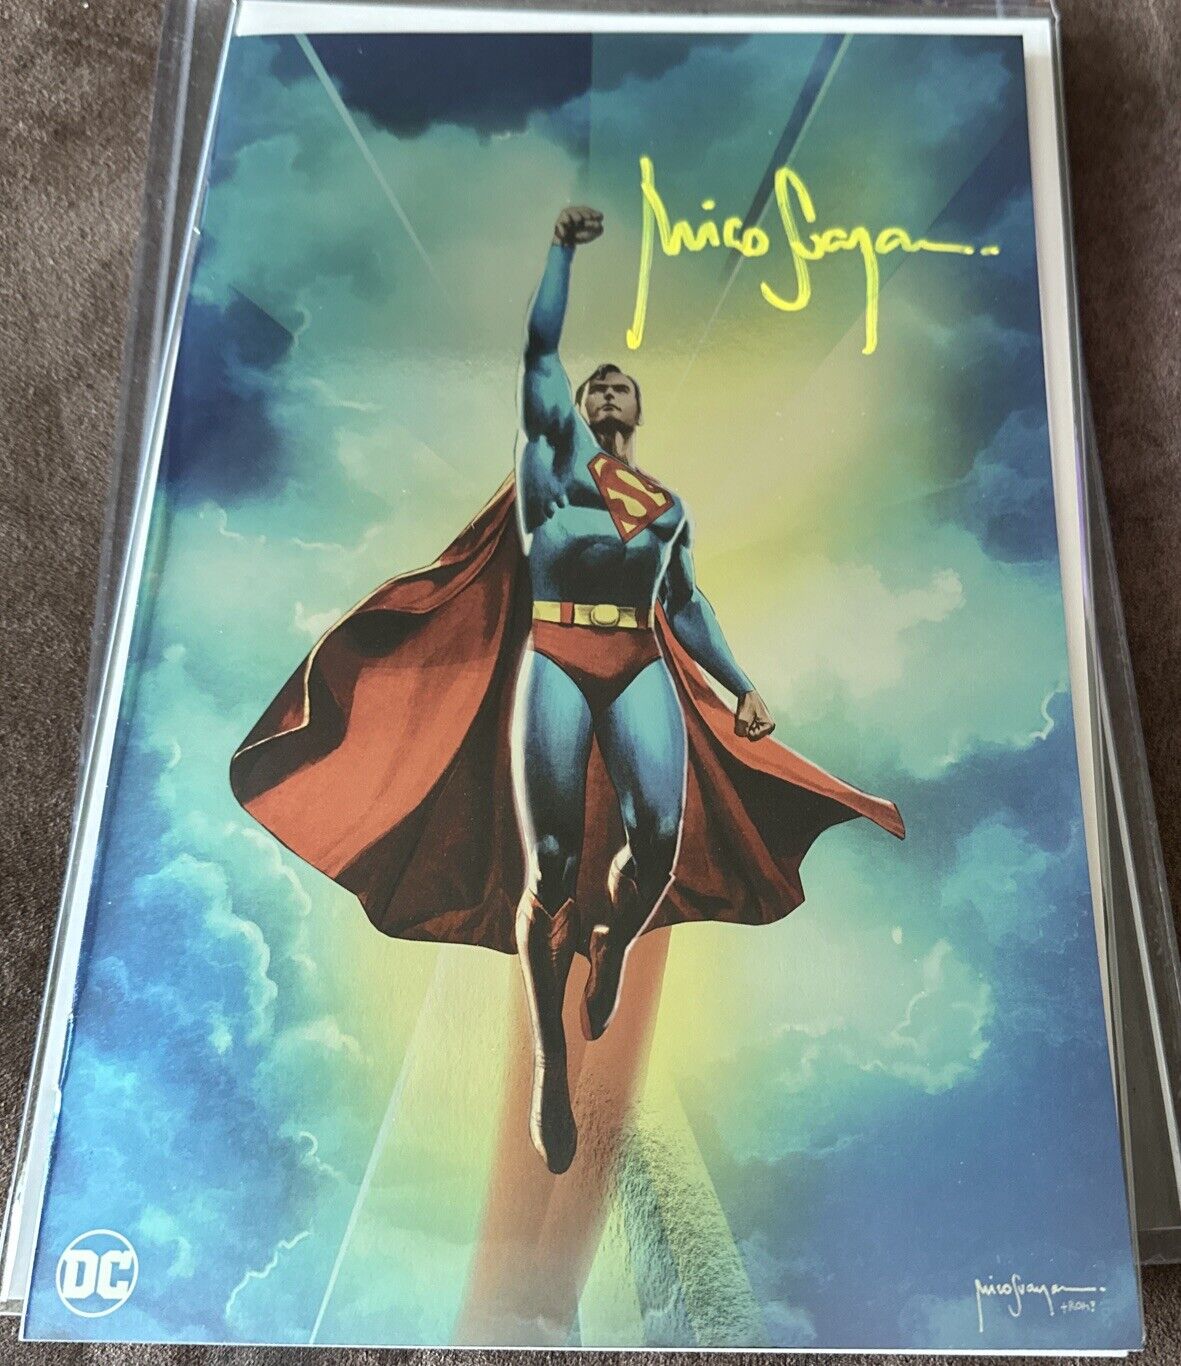 Superman '78 #1 BTC & NYCC Exclusive FOIL Virgin signed by Mico Suayan w/ COA